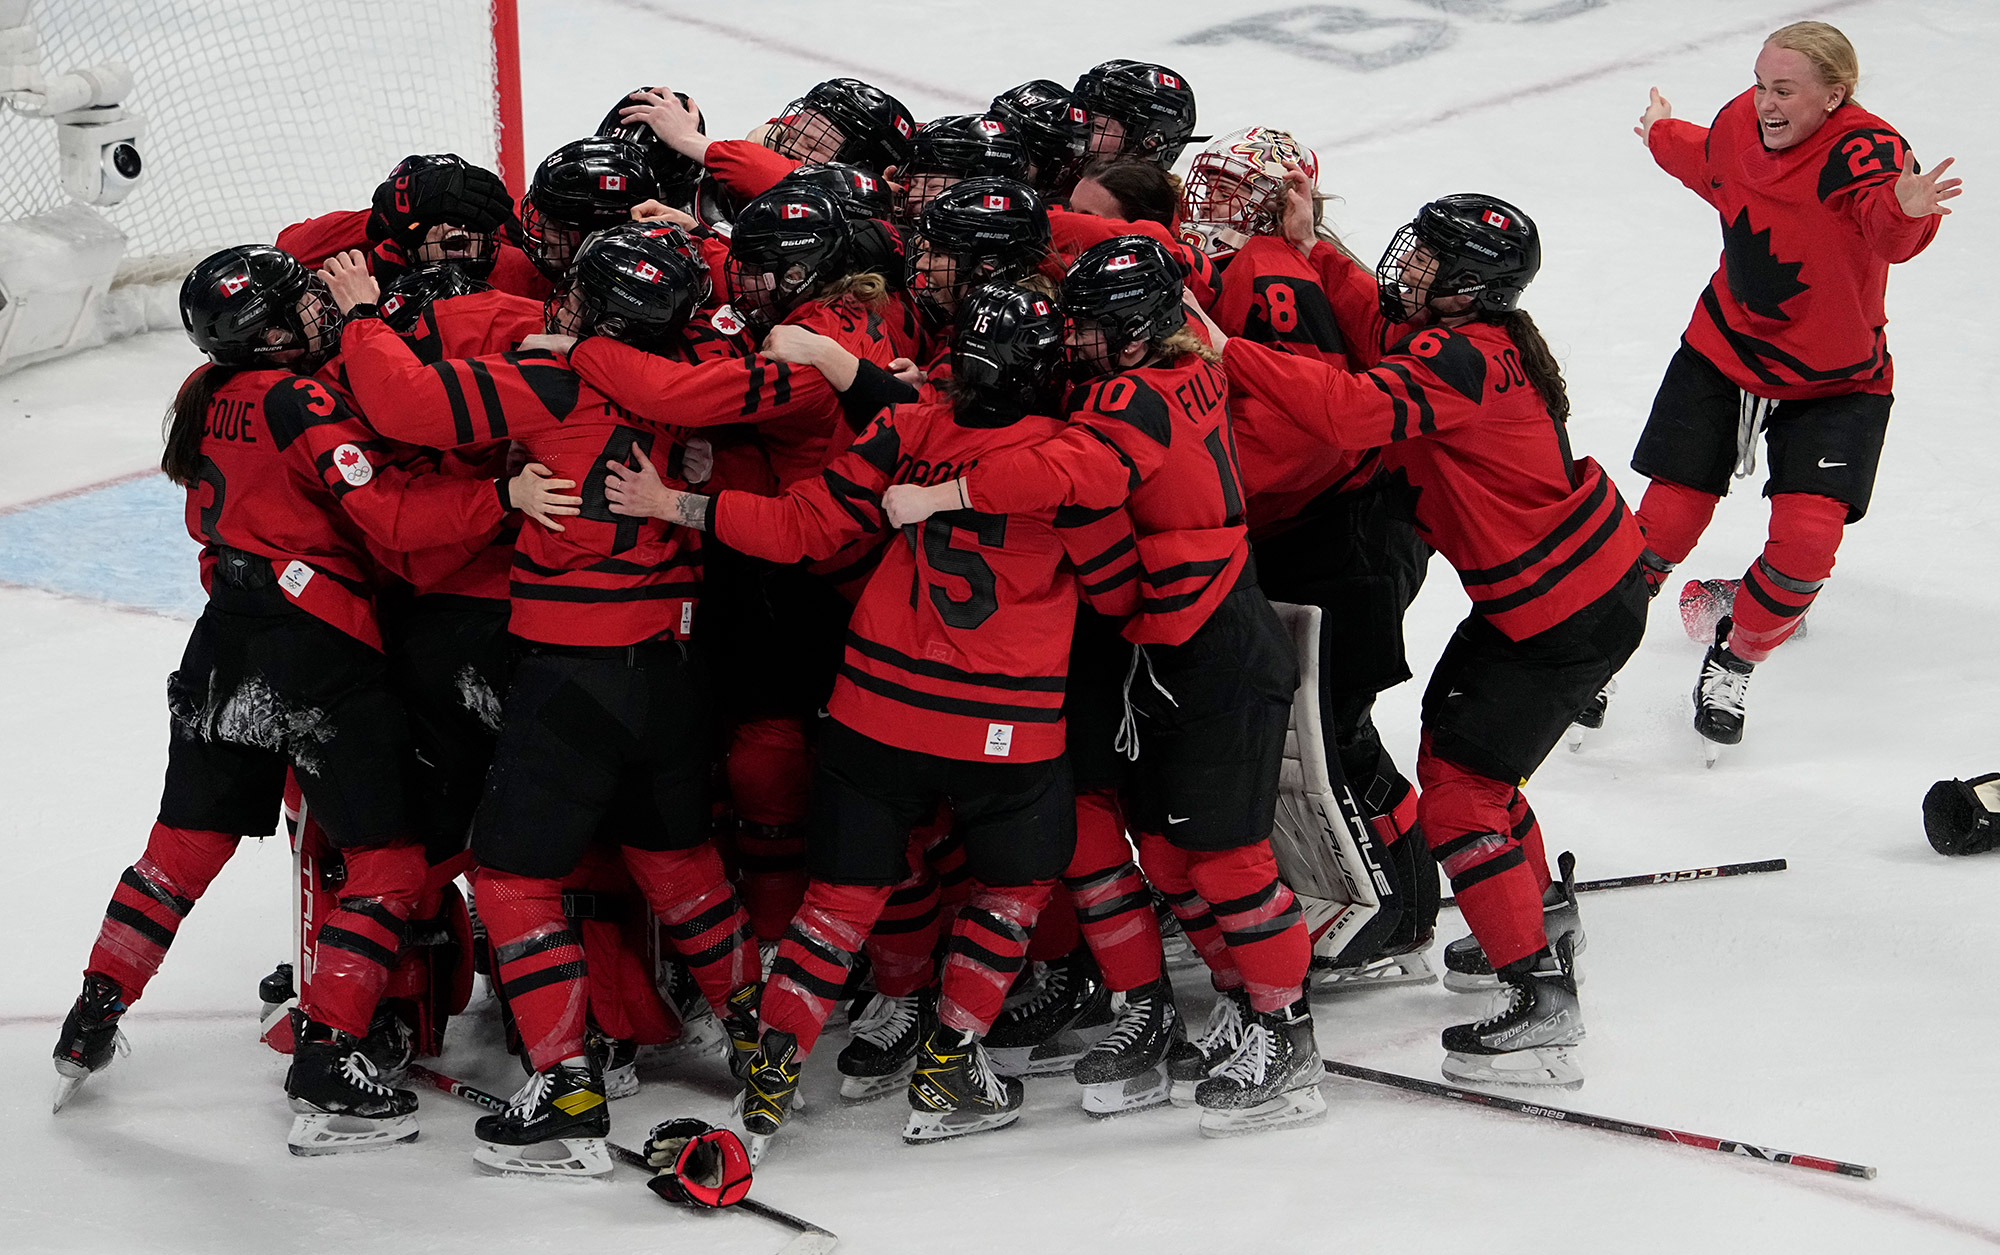 The Canadian women's hockey team celebrates after winning the gold-medal game on Thursday.